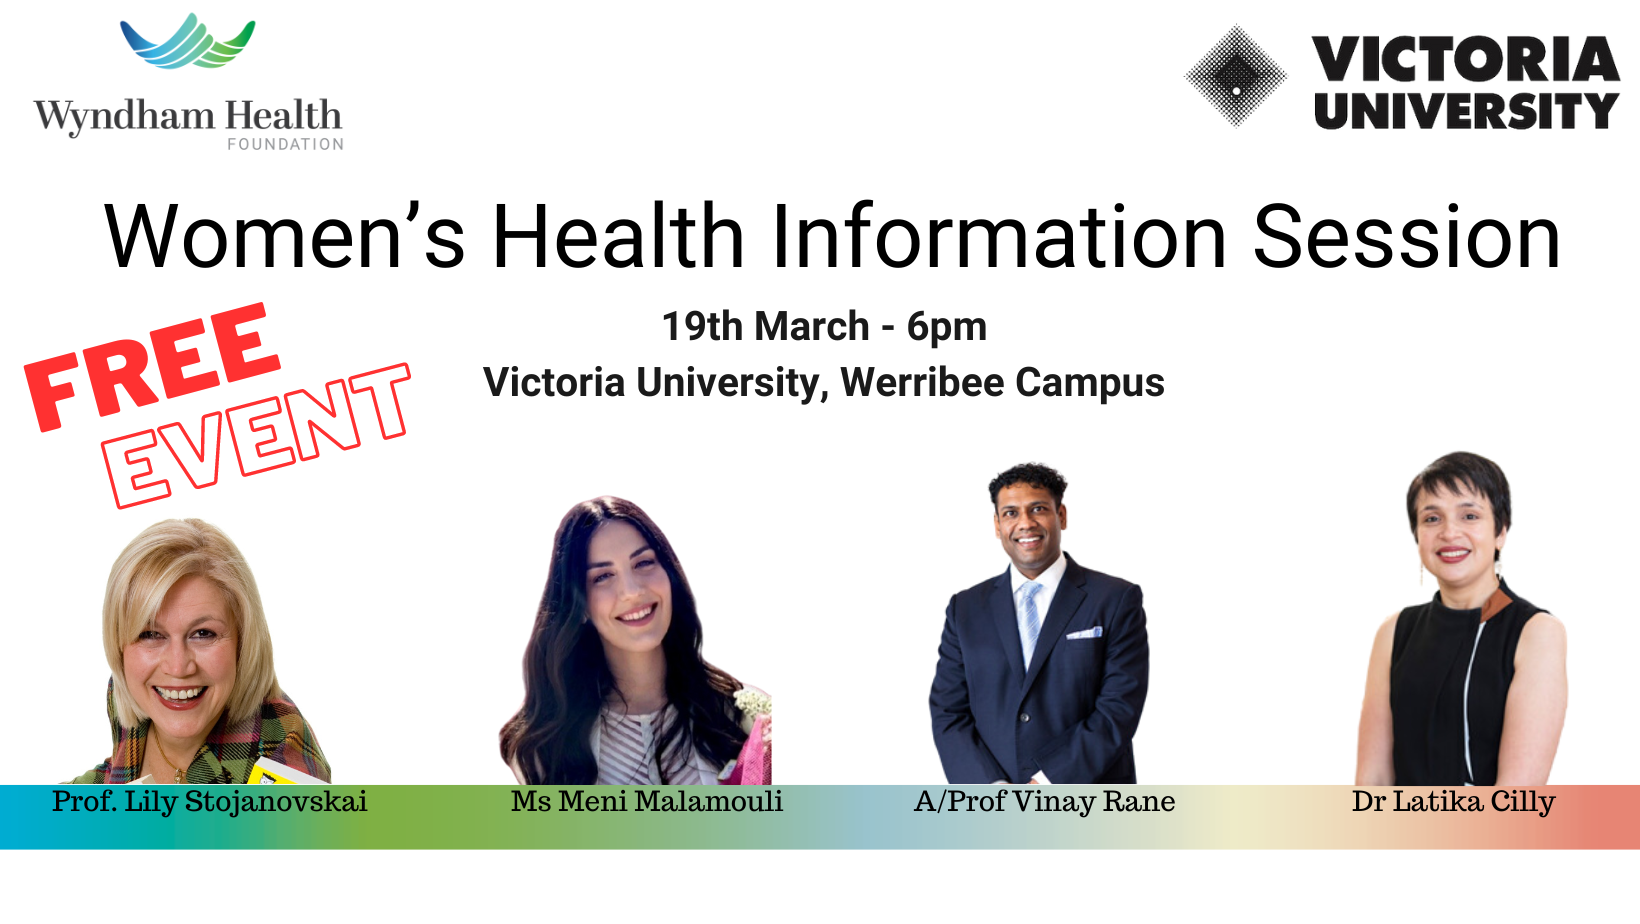 Victoria University together with Wyndham Health Foundation are proud to bring you a series of Health Information Sessions